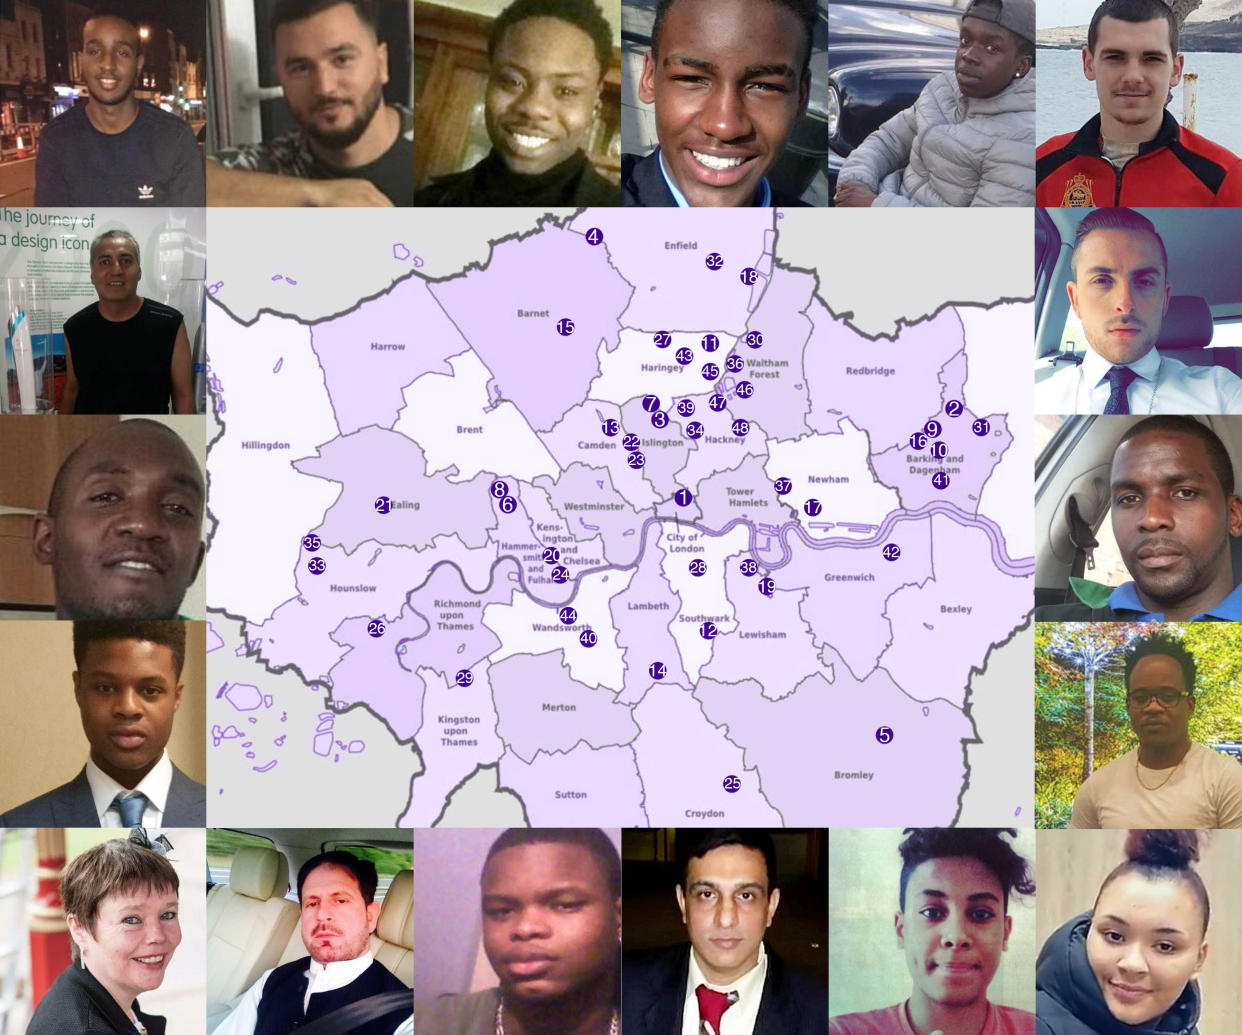 Some of the latest victims of London’s violence. (Yahoo News UK)